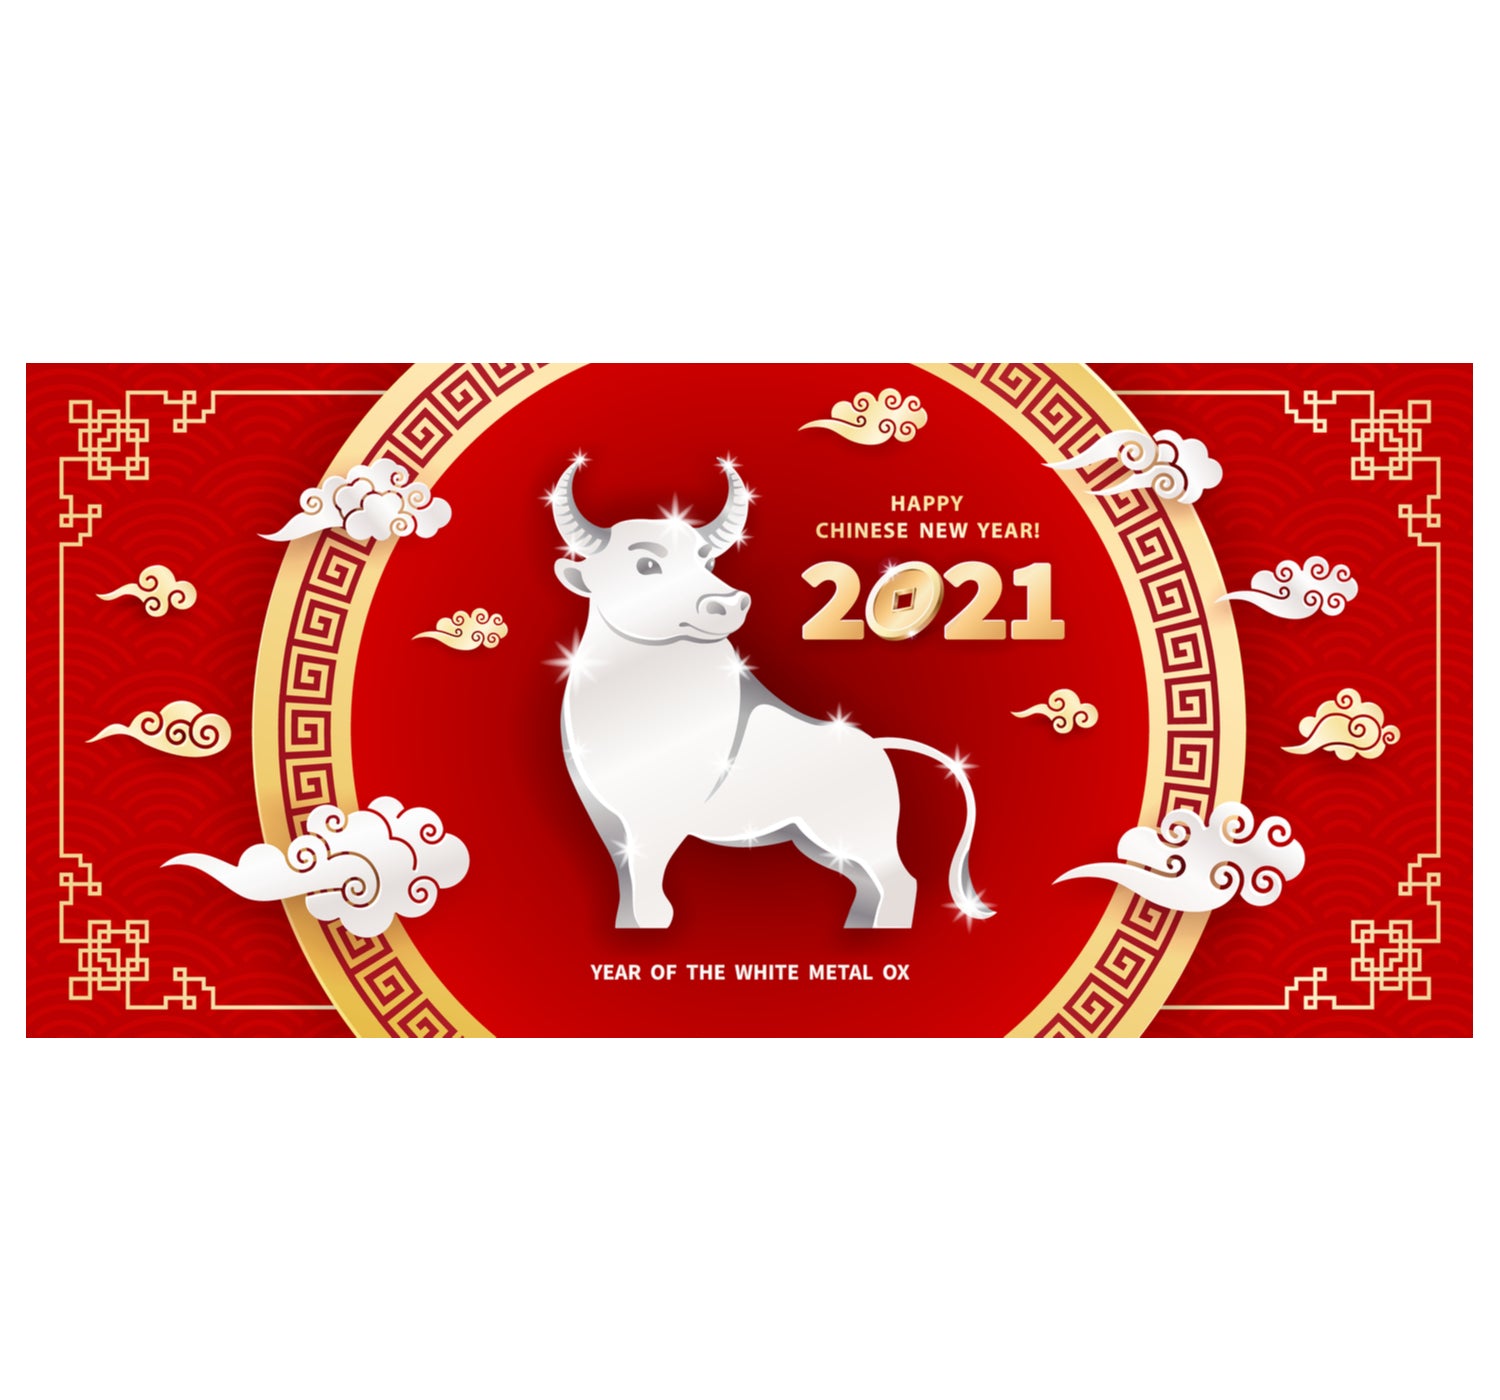 Celebrate a New Year of Wellness with our Lunar New Year Pack